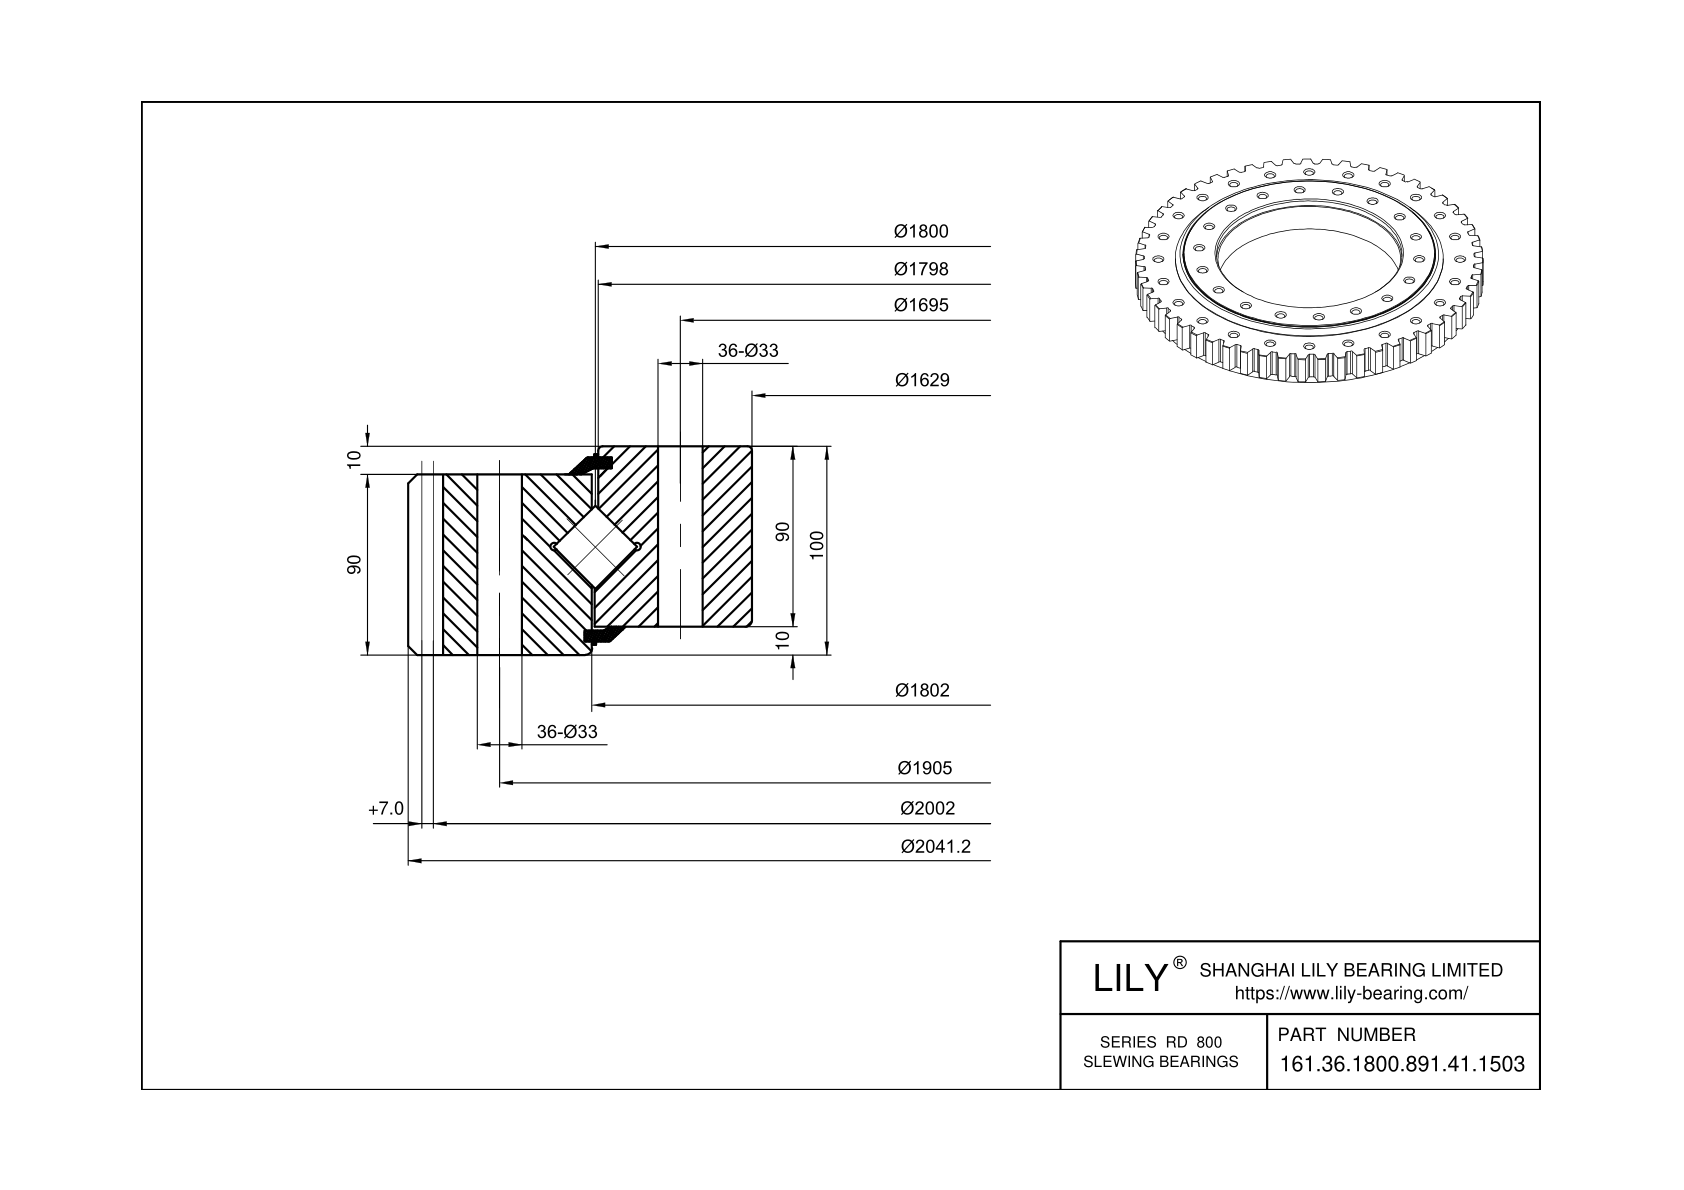 161.36.1800.891.41.1503 Cross Roller Slewing Ring Bearing cad drawing